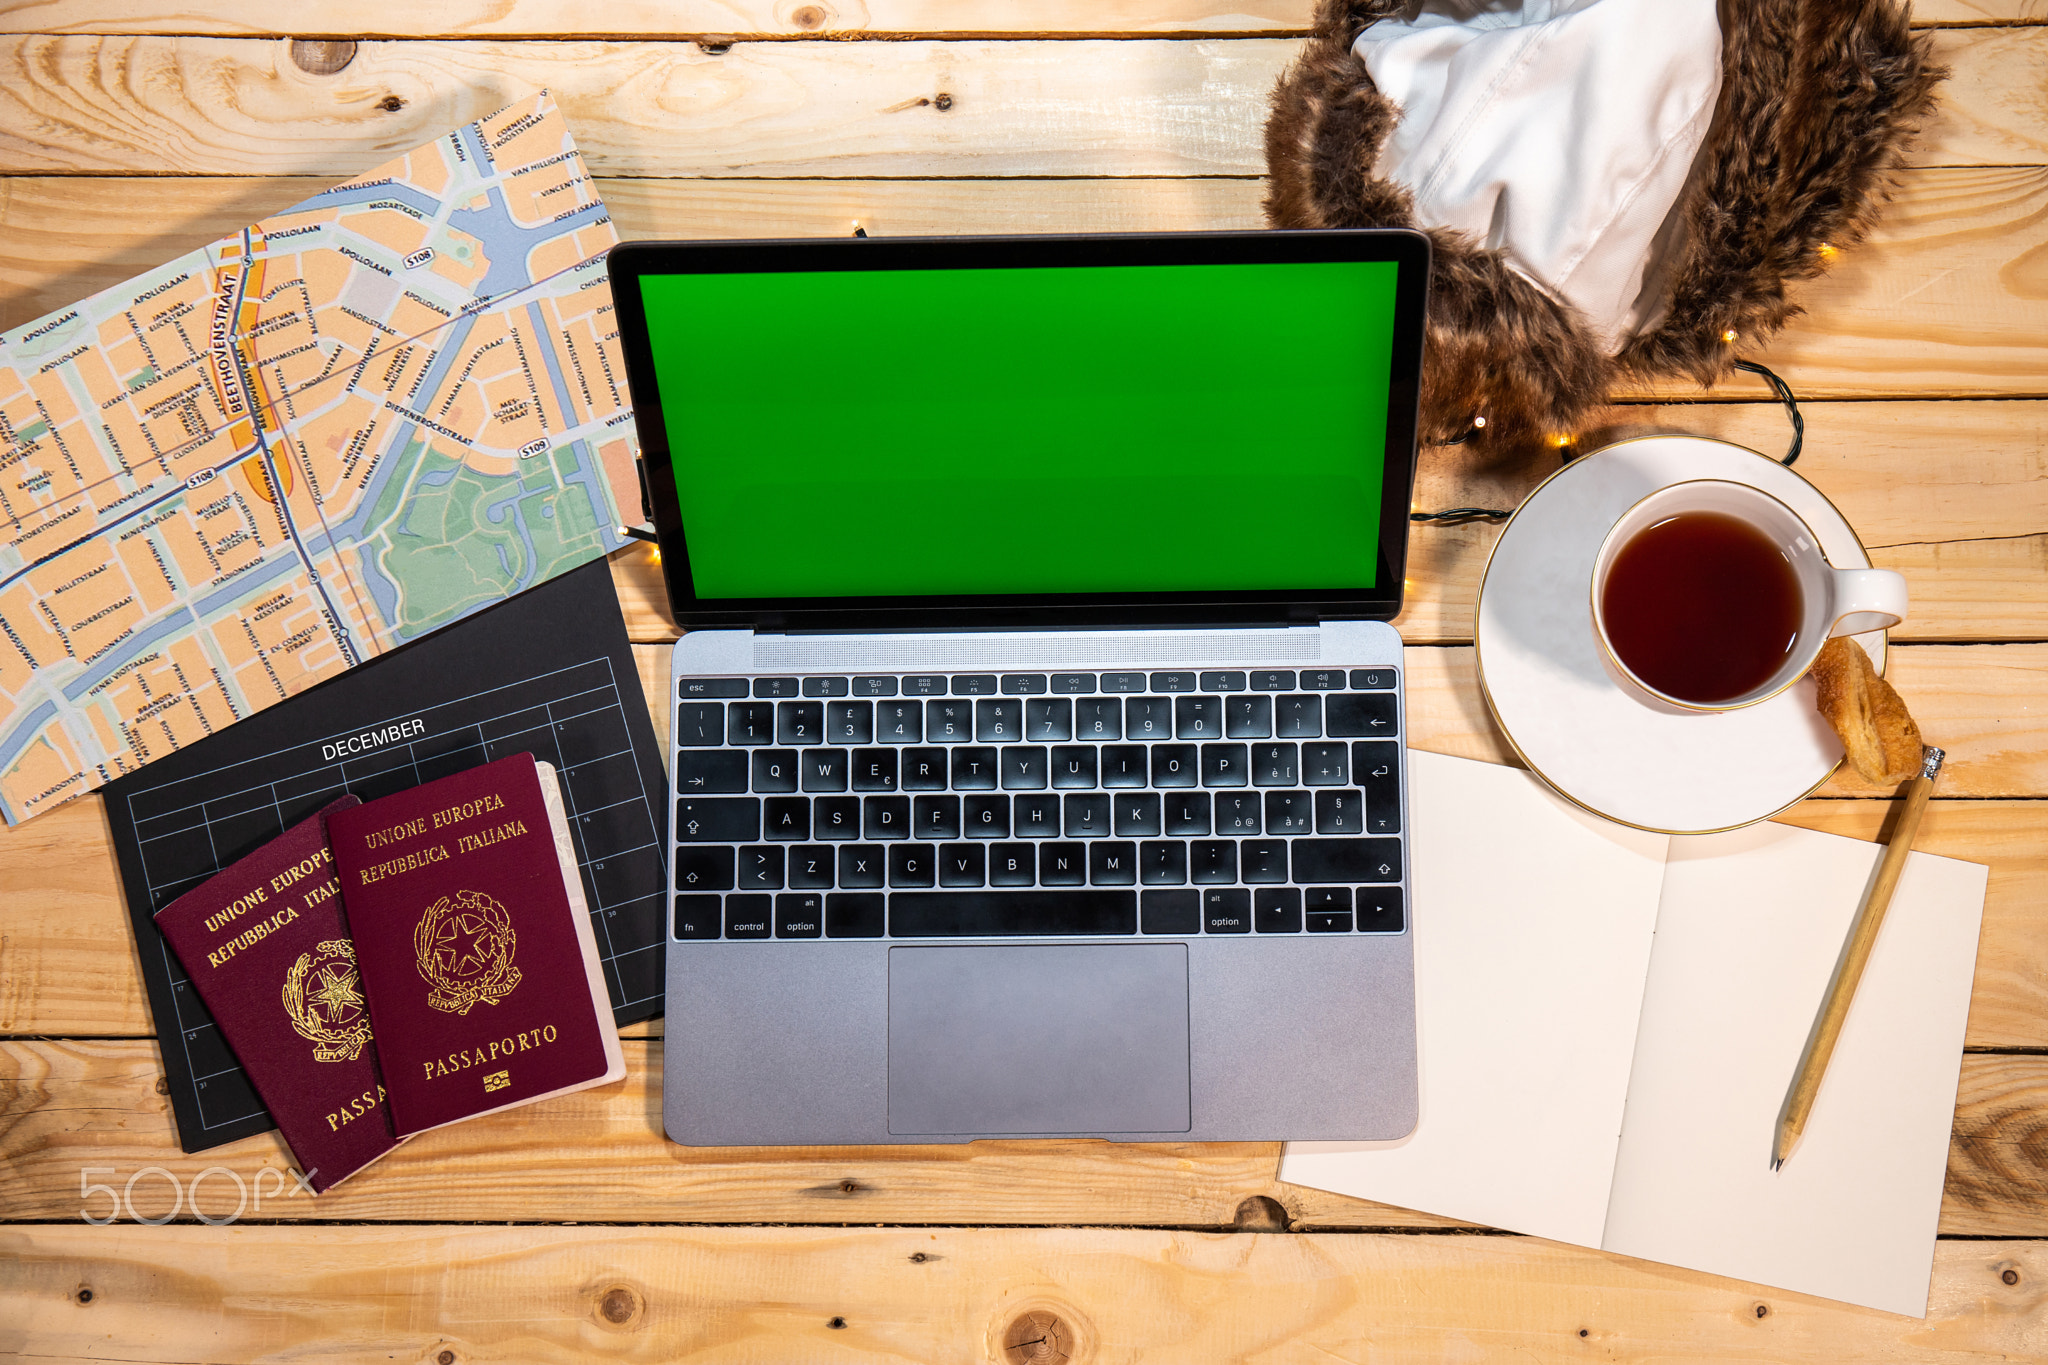 Organize a new trip with map, computer and passports.